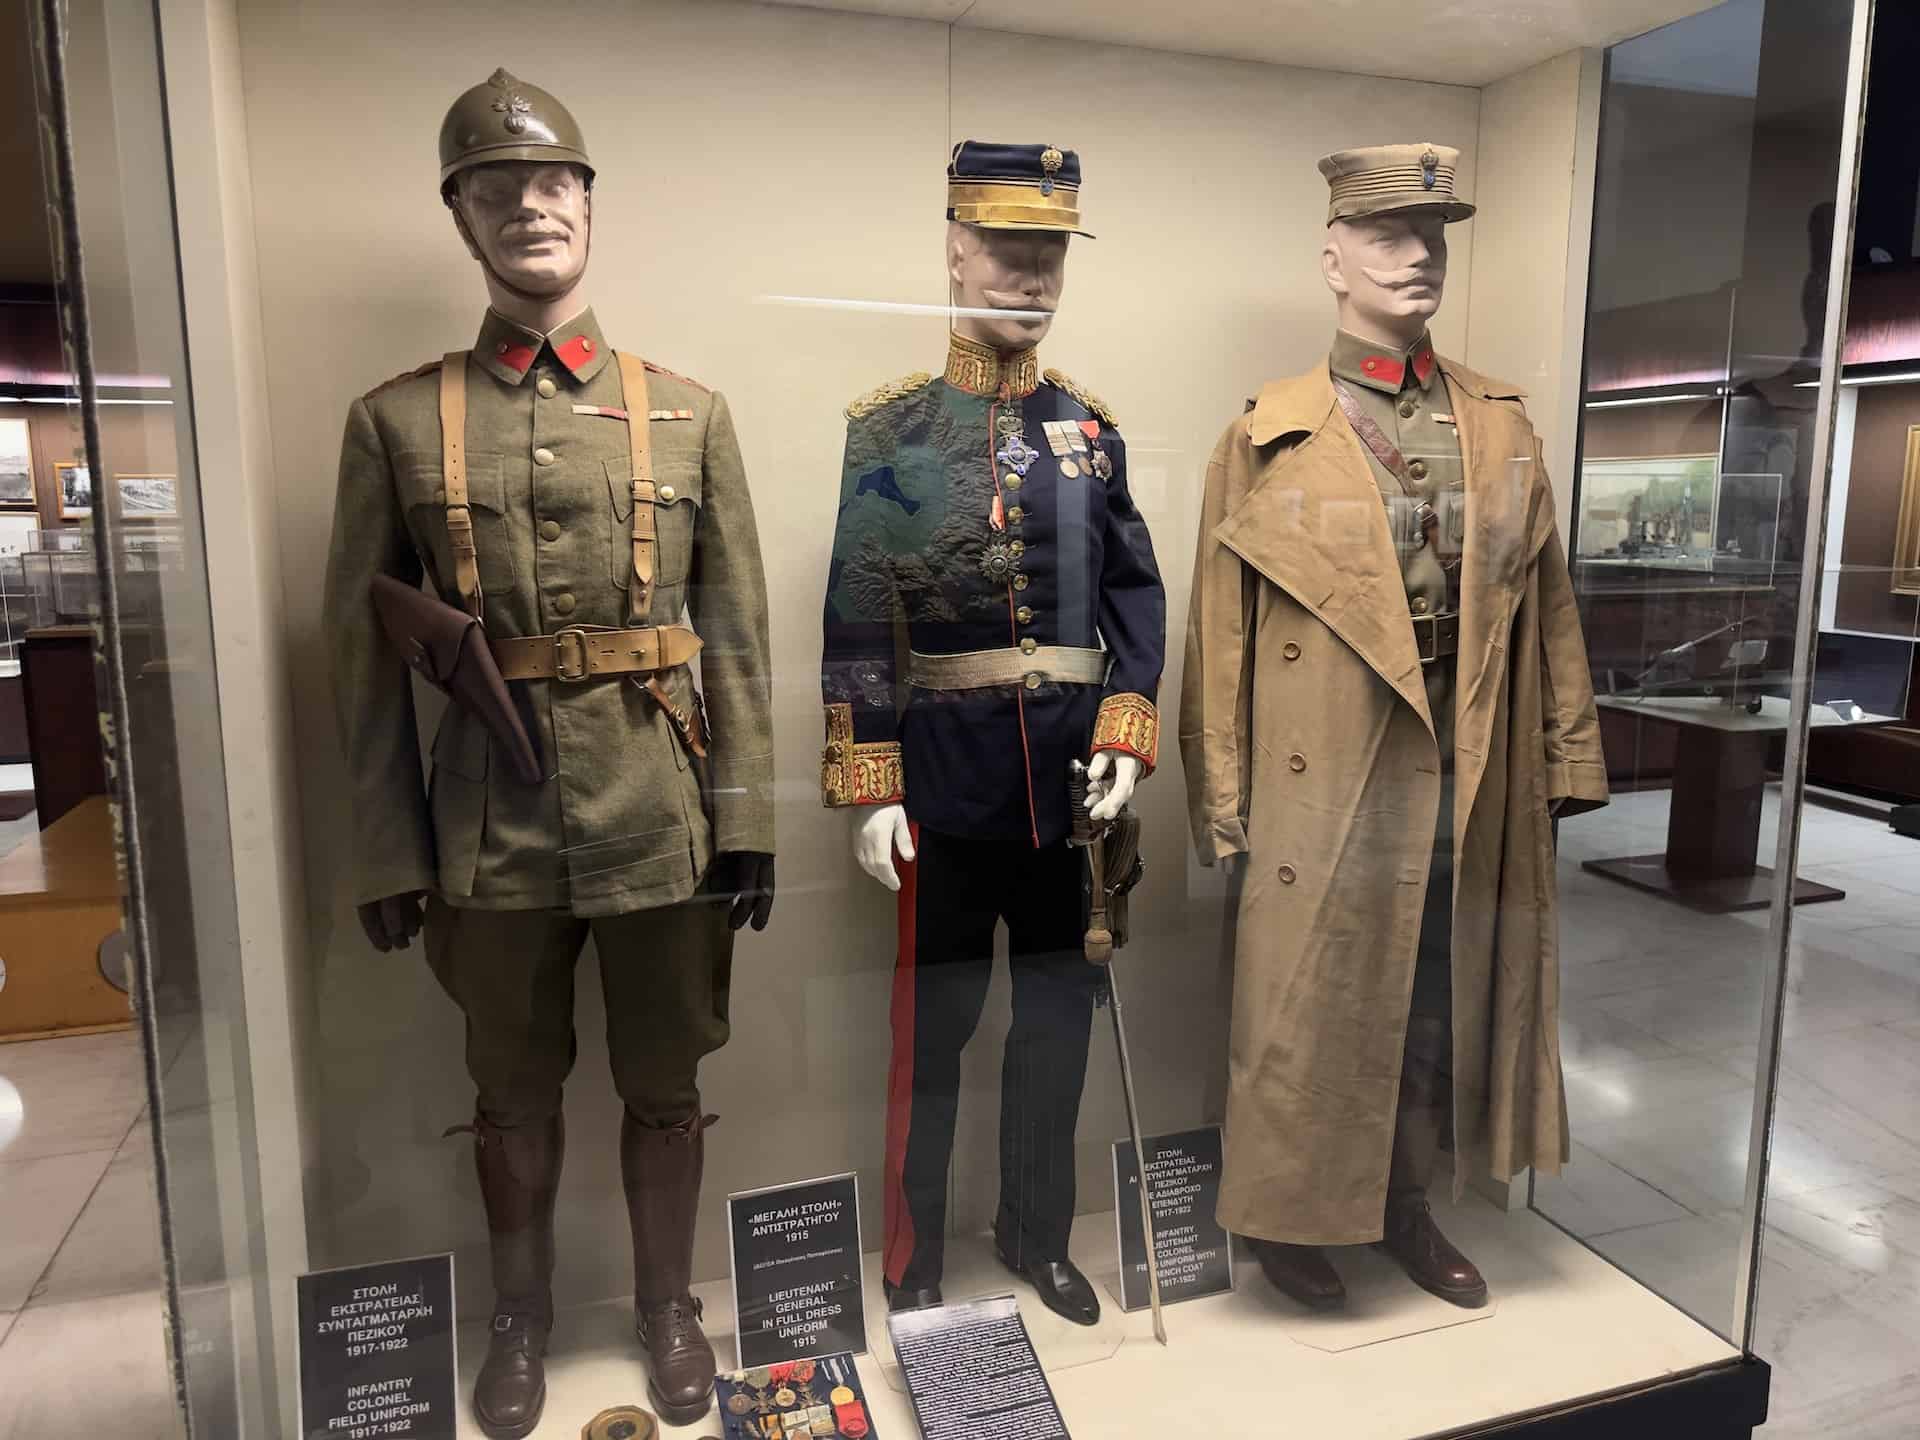 Infantry colonel field uniform, 1917-1922, (left); Lieutenant general in full dress uniform, 1915 (center); Infantry lieutenant colonel field uniform with trench coat, 1917-1922 (right) at the War Museum in Athens, Greece